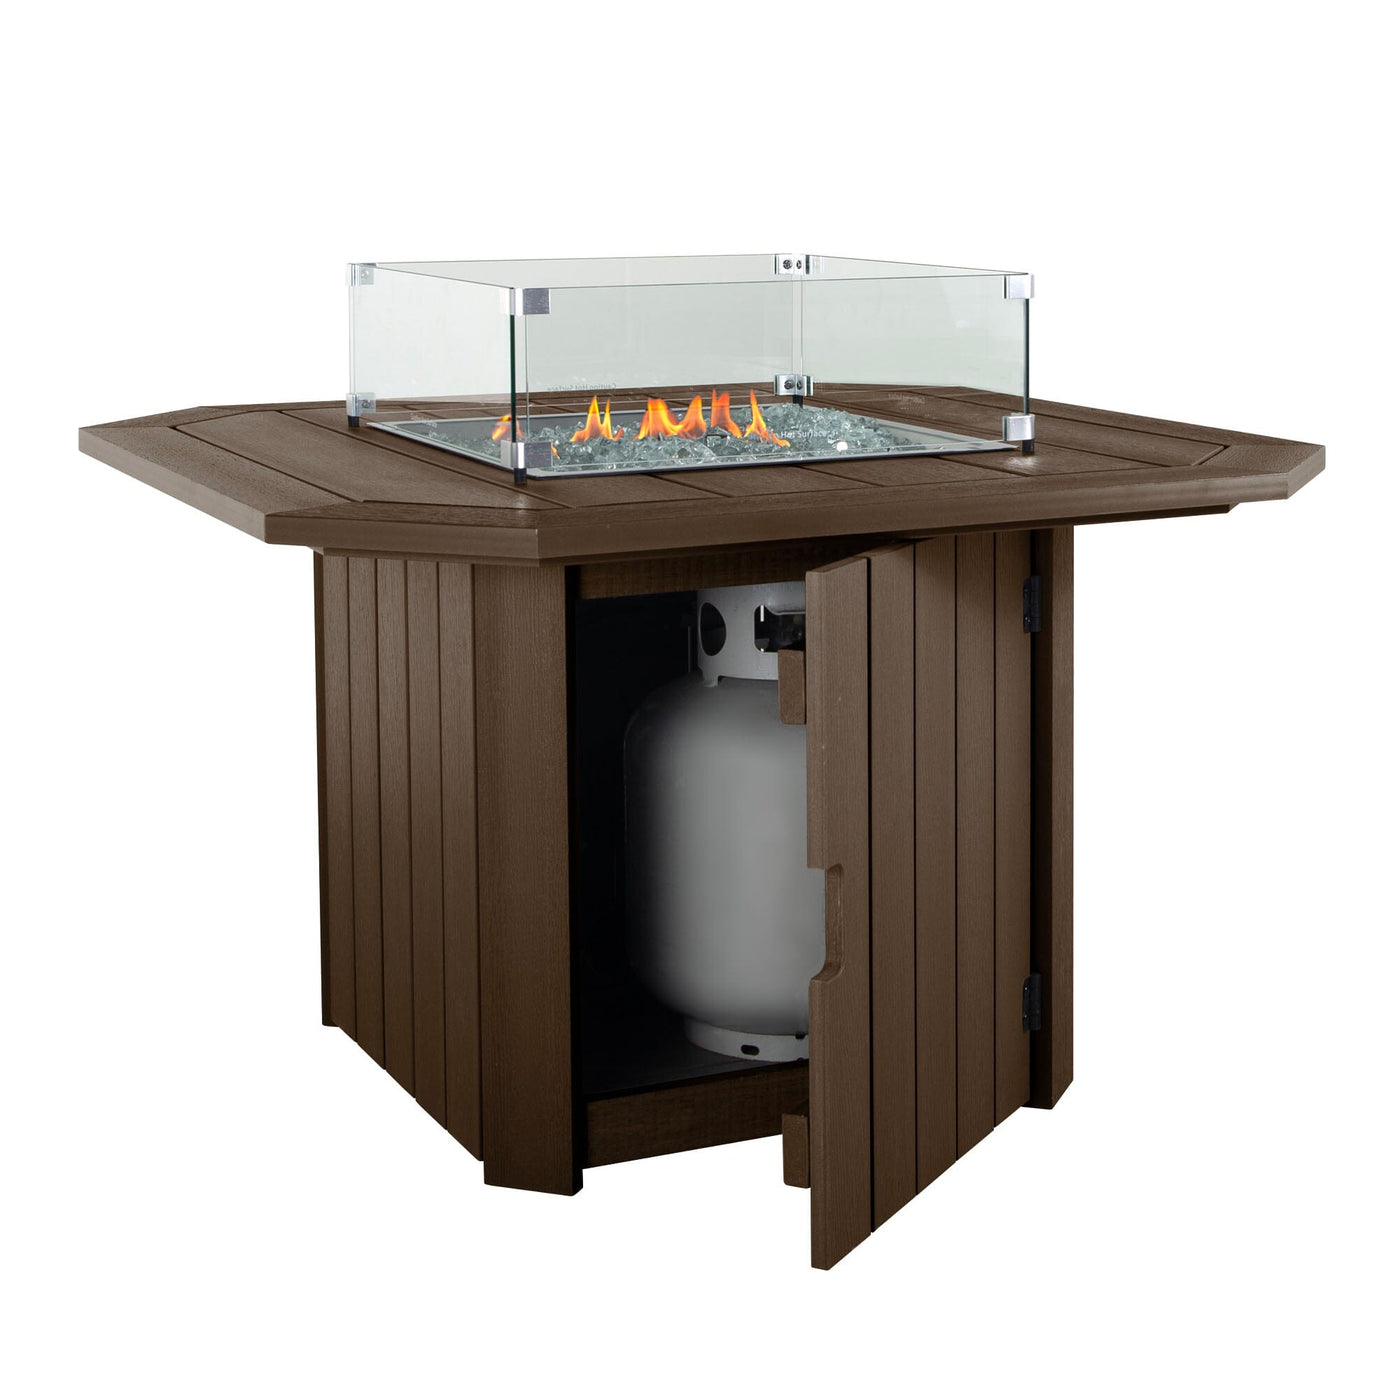 Brown Oasis Fire table with propane tank in view